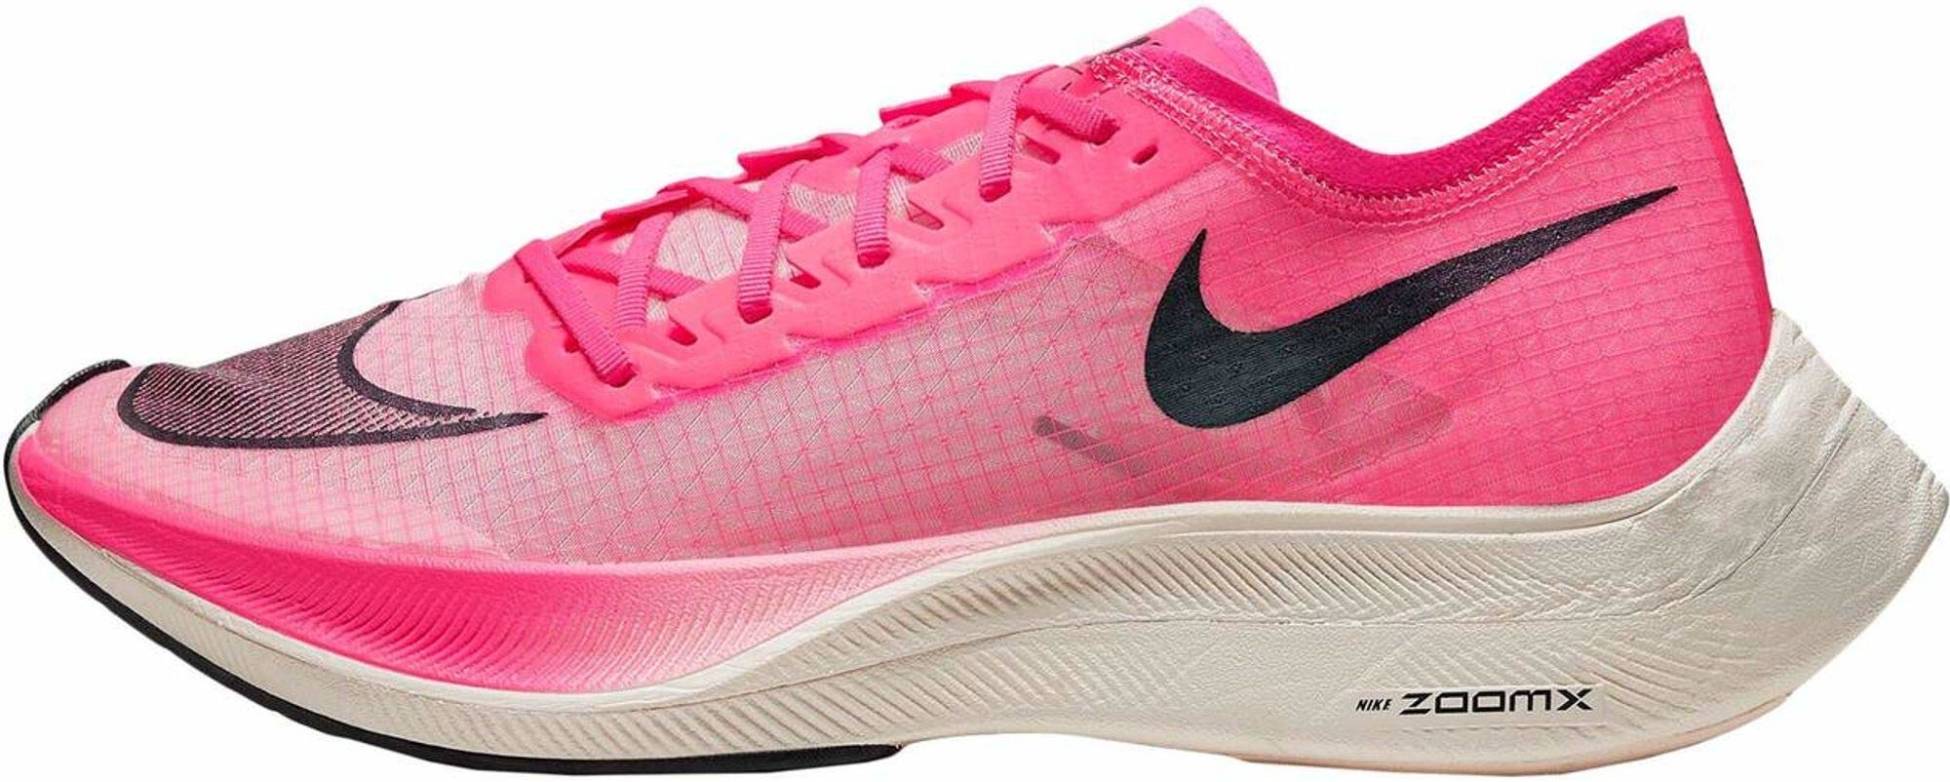 20+ Pink running shoes: Save up to 30 